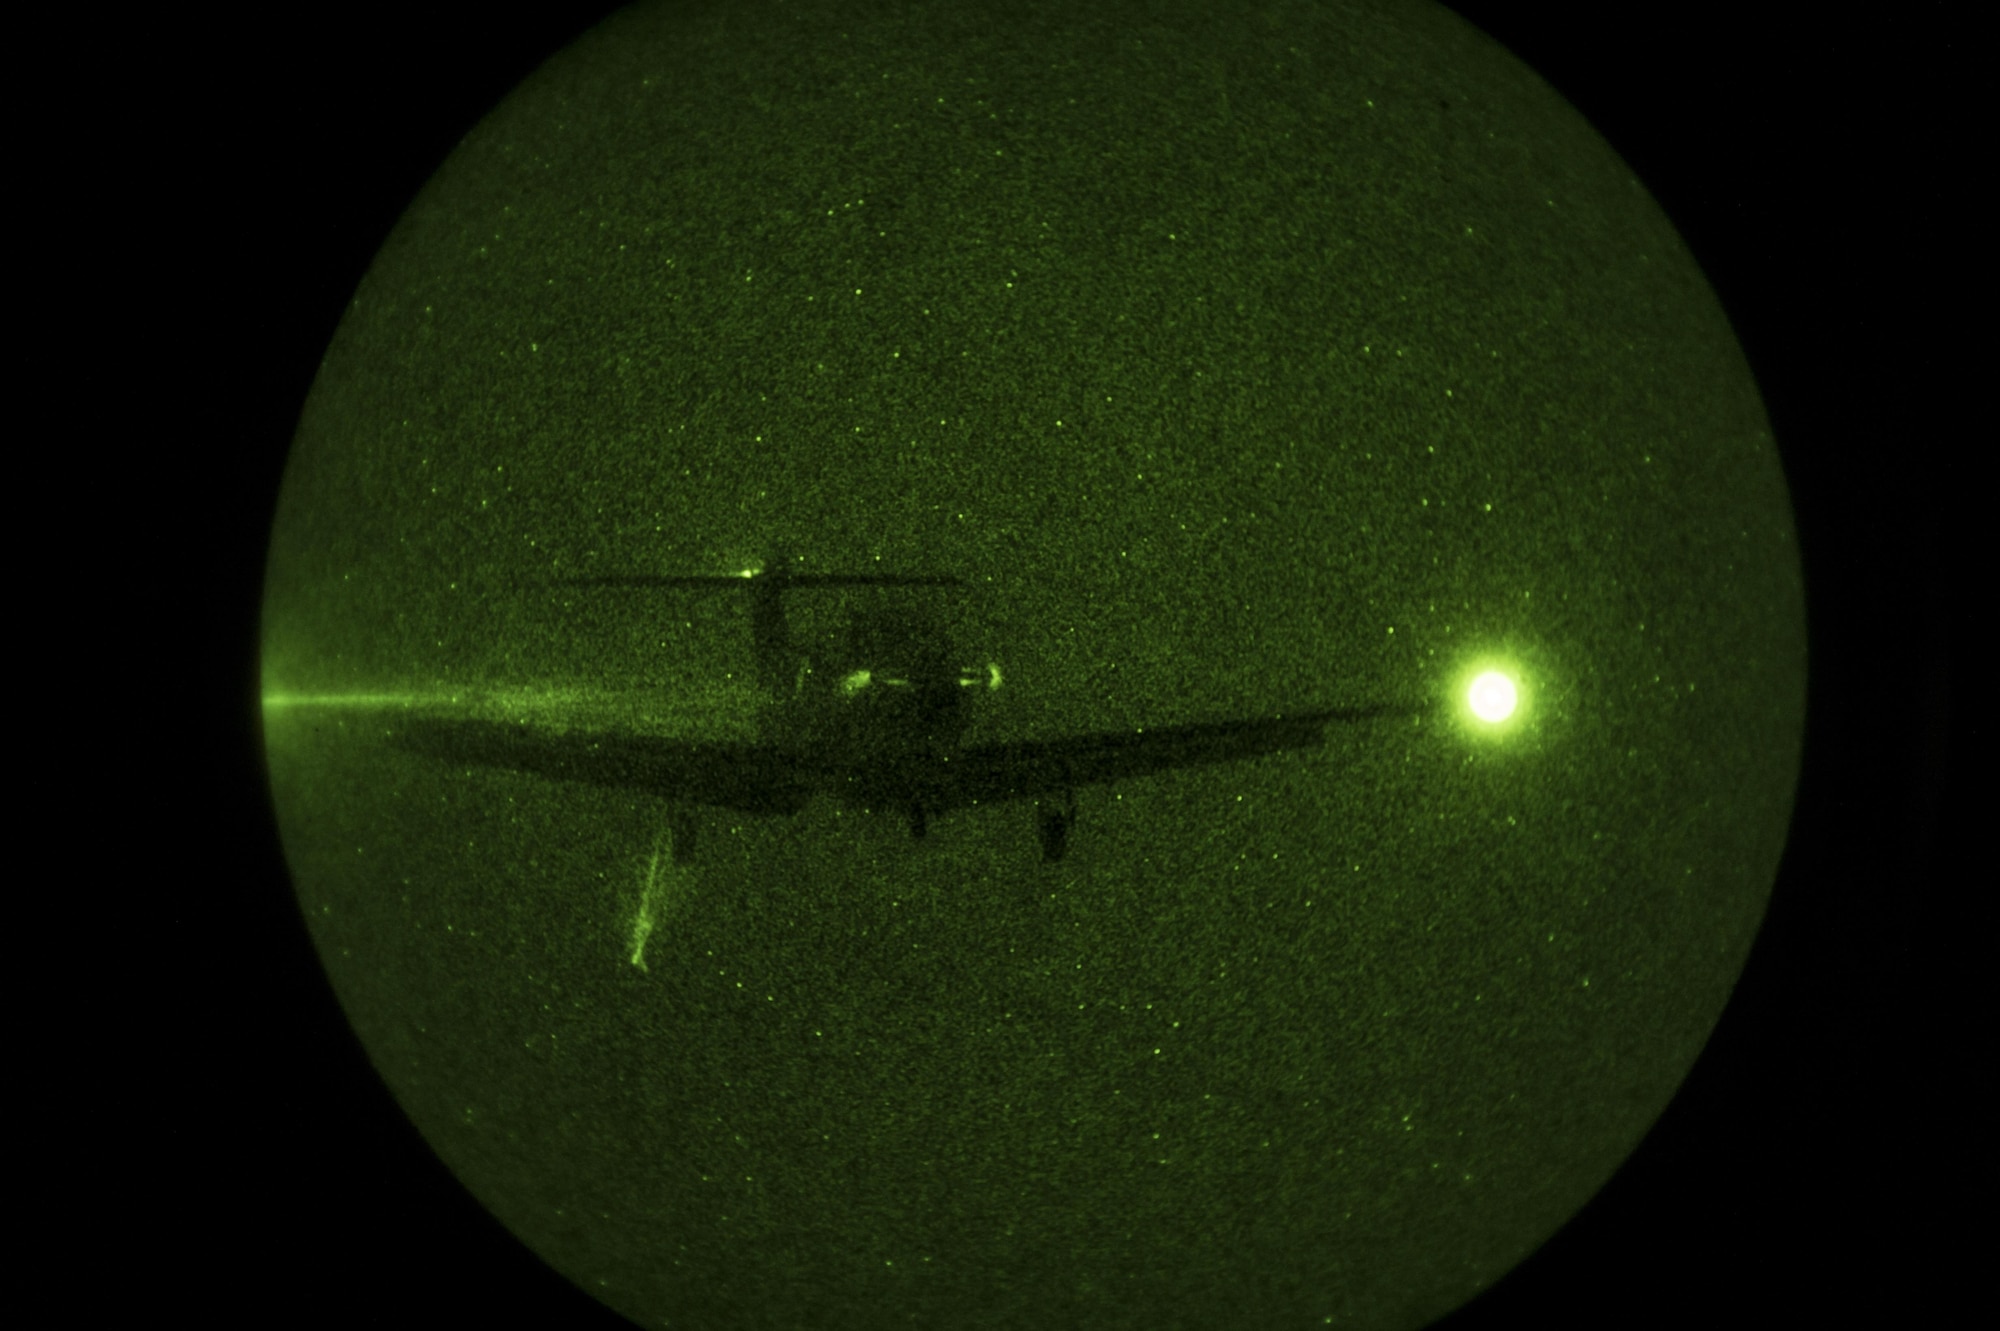 A U-28A assigned to the 318th Special Operations Squadron prepares to land during a Full Mission Profile exercise at White Sands Missile Range, N.M., Oct. 12, 2016.  The FMP was utilized to integrate Special Operations Forces and foster tactical maturity through deliberate planning and execution of a force projection package and enable Special Tactics Airmen pre-deployment evaluation. (U.S. Air Force photo by Tech. Sgt. Manuel J. Martinez)